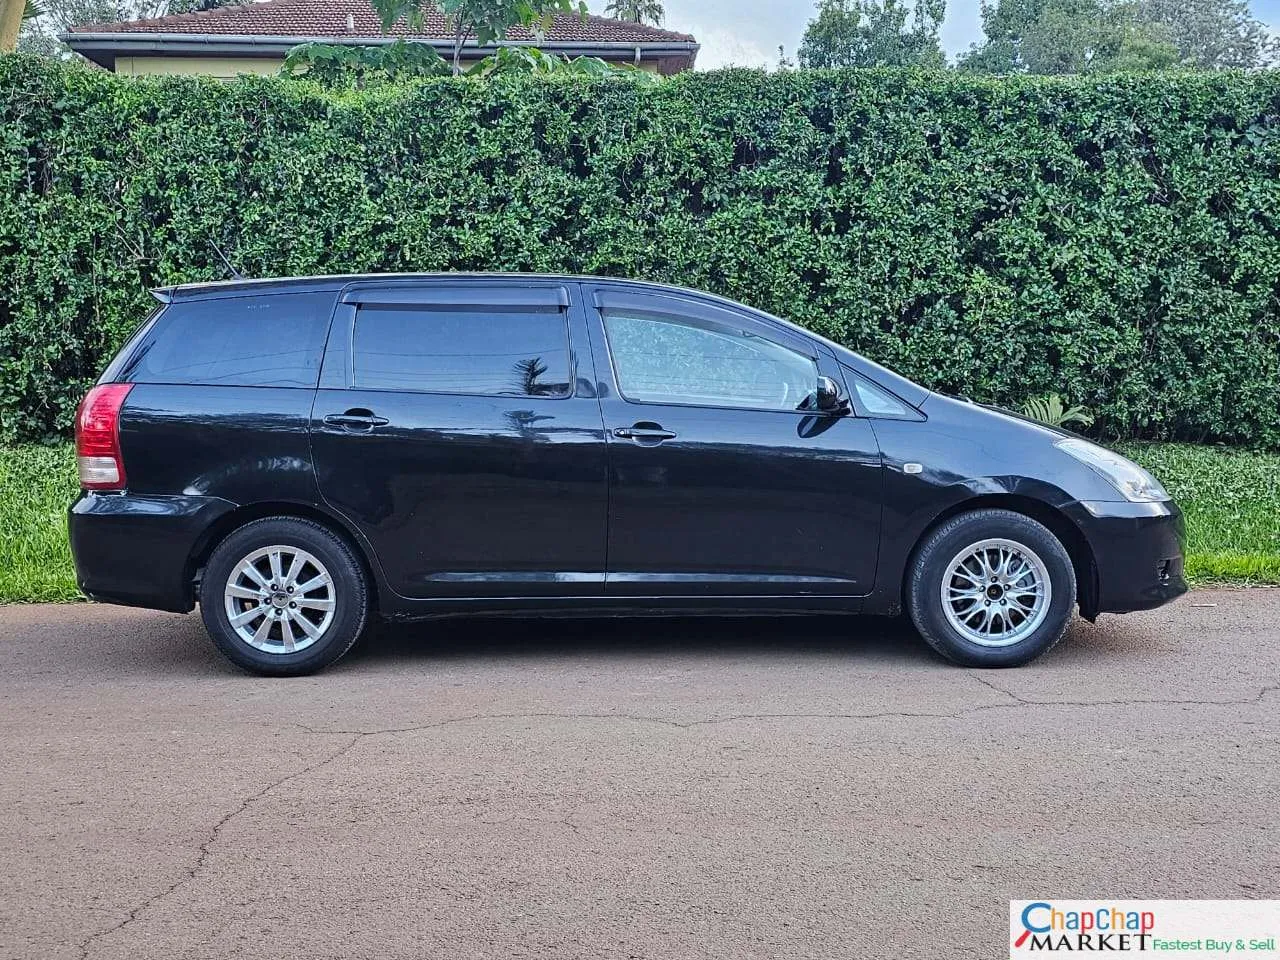 Cars Cars For Sale/Vehicles-Toyota WISH QUICK SALE You Pay 30% Deposit Trade in OK EXCLUSIVE 9